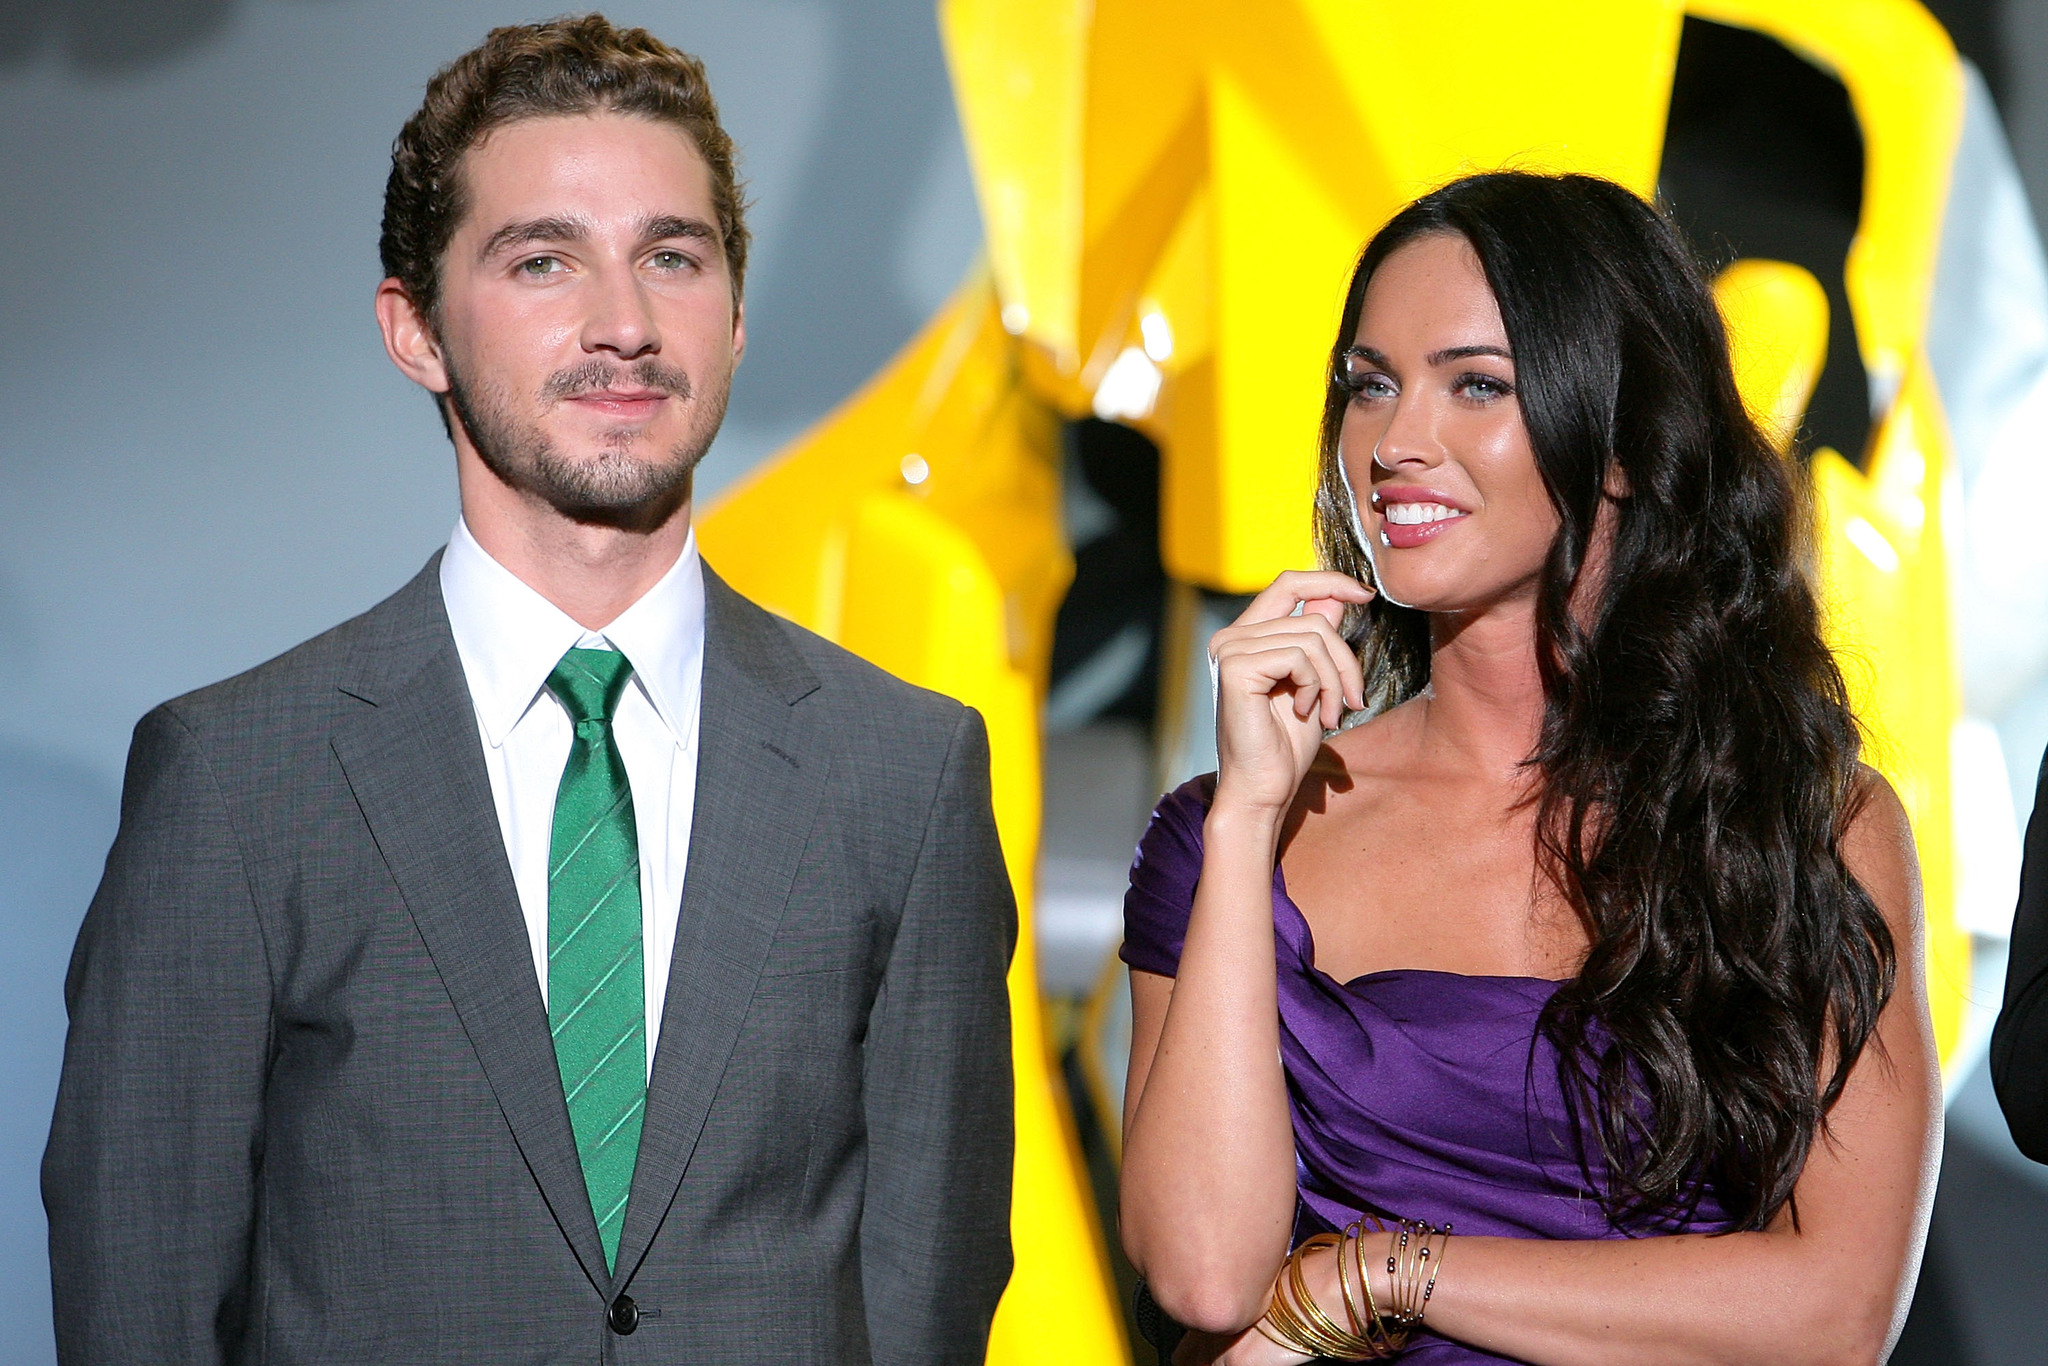 Shia LaBeouf and Megan Fox at event of Transformers: Revenge of the Fallen (2009)